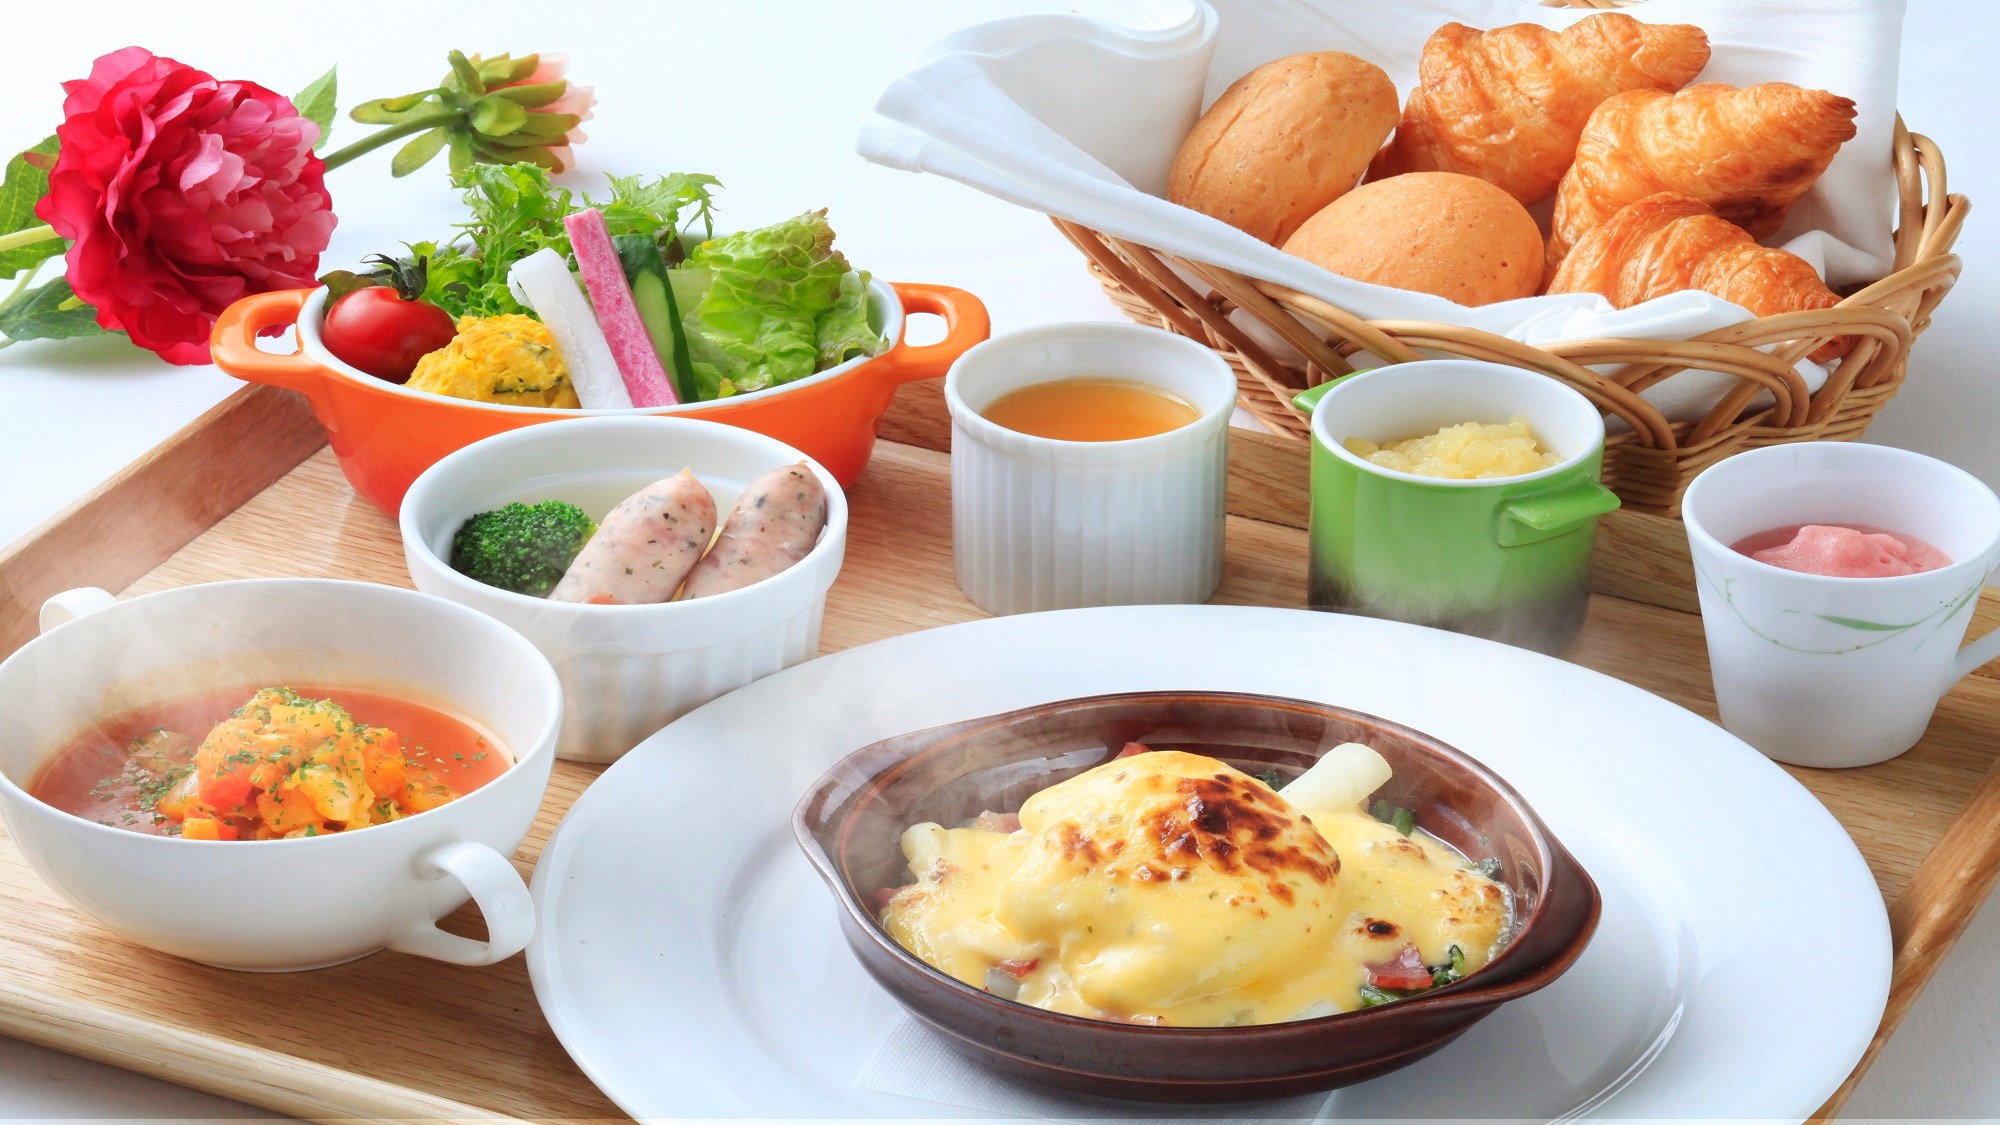 ■ "Breakfast" You can enjoy Japanese and Western dishes prepared with both bread and rice.